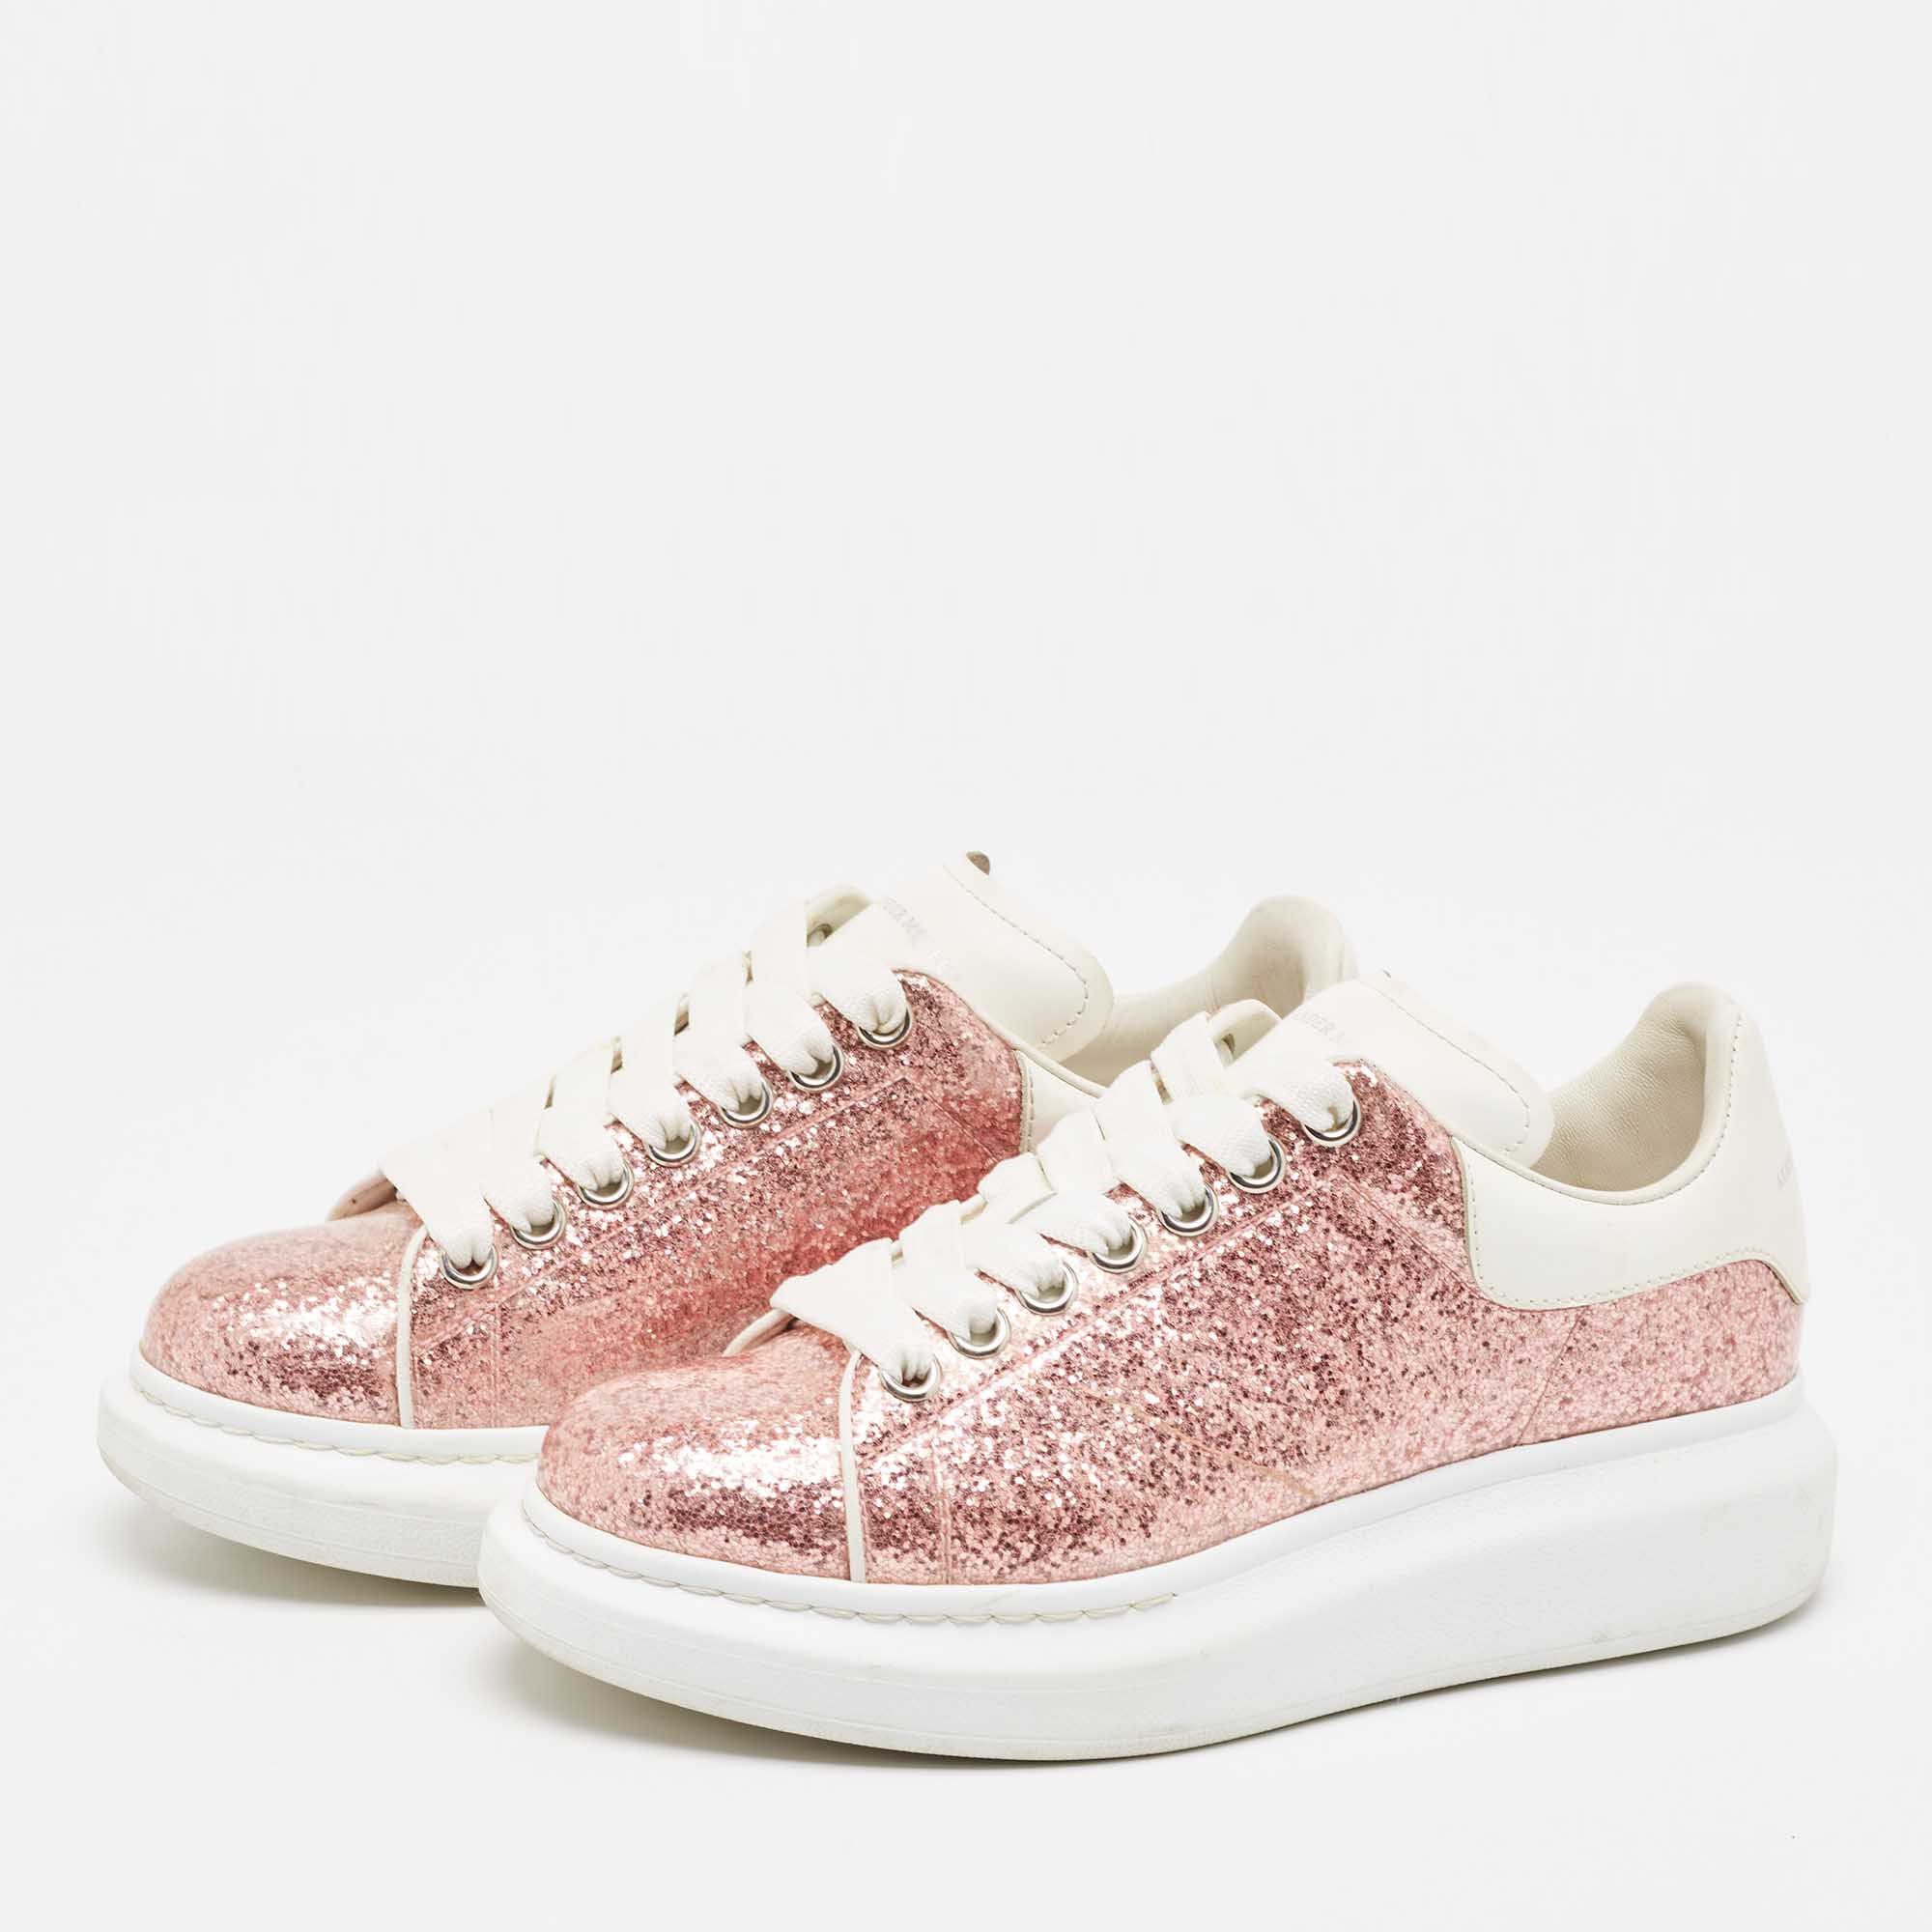 

Alexander McQueen Metallic PVC and Leather Oversized Low Top Sneakers Size